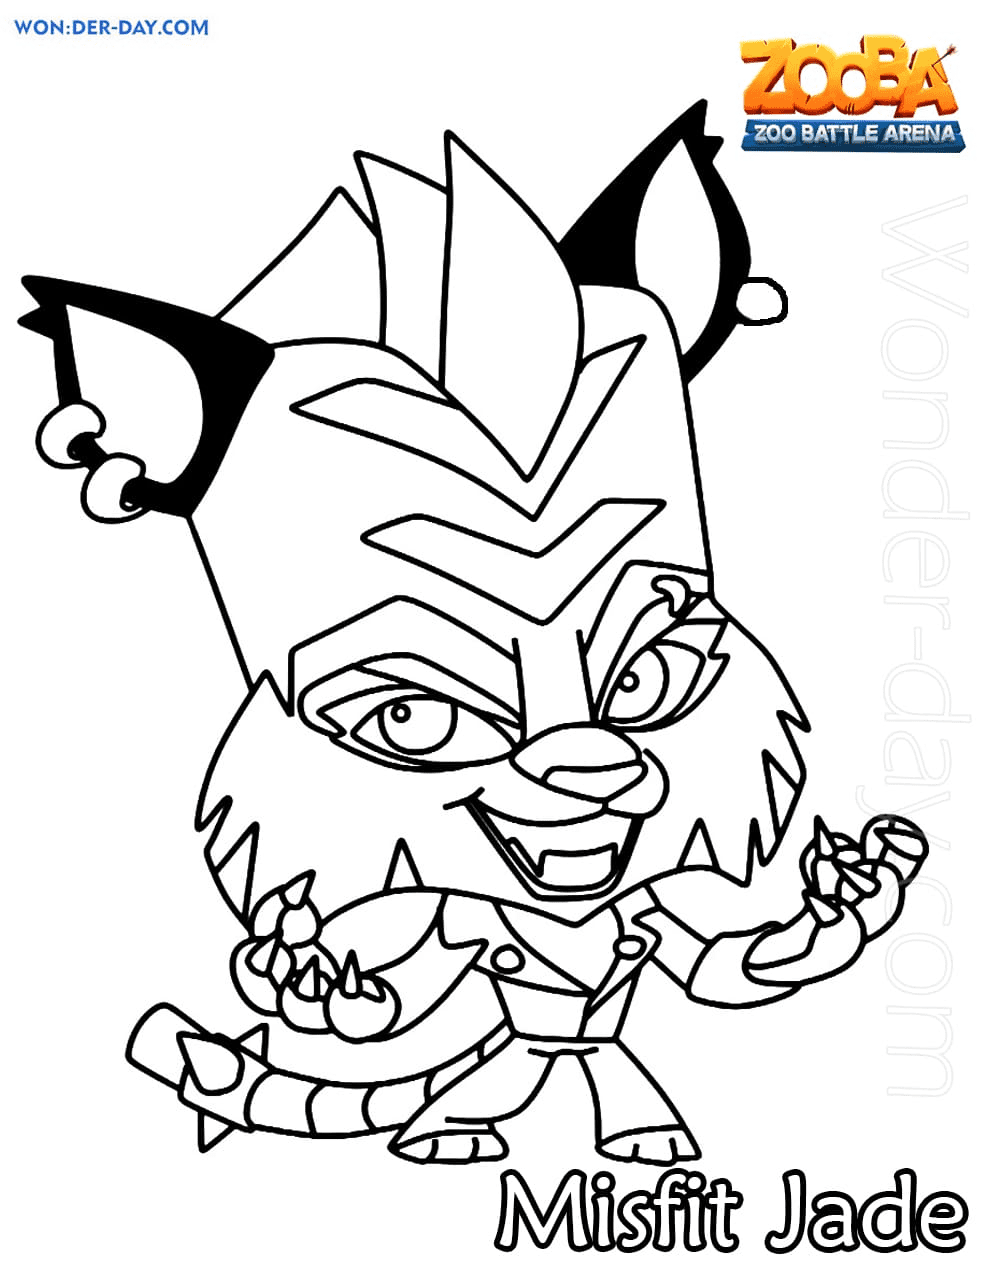 Misfit Jade Zooba Coloring Pages